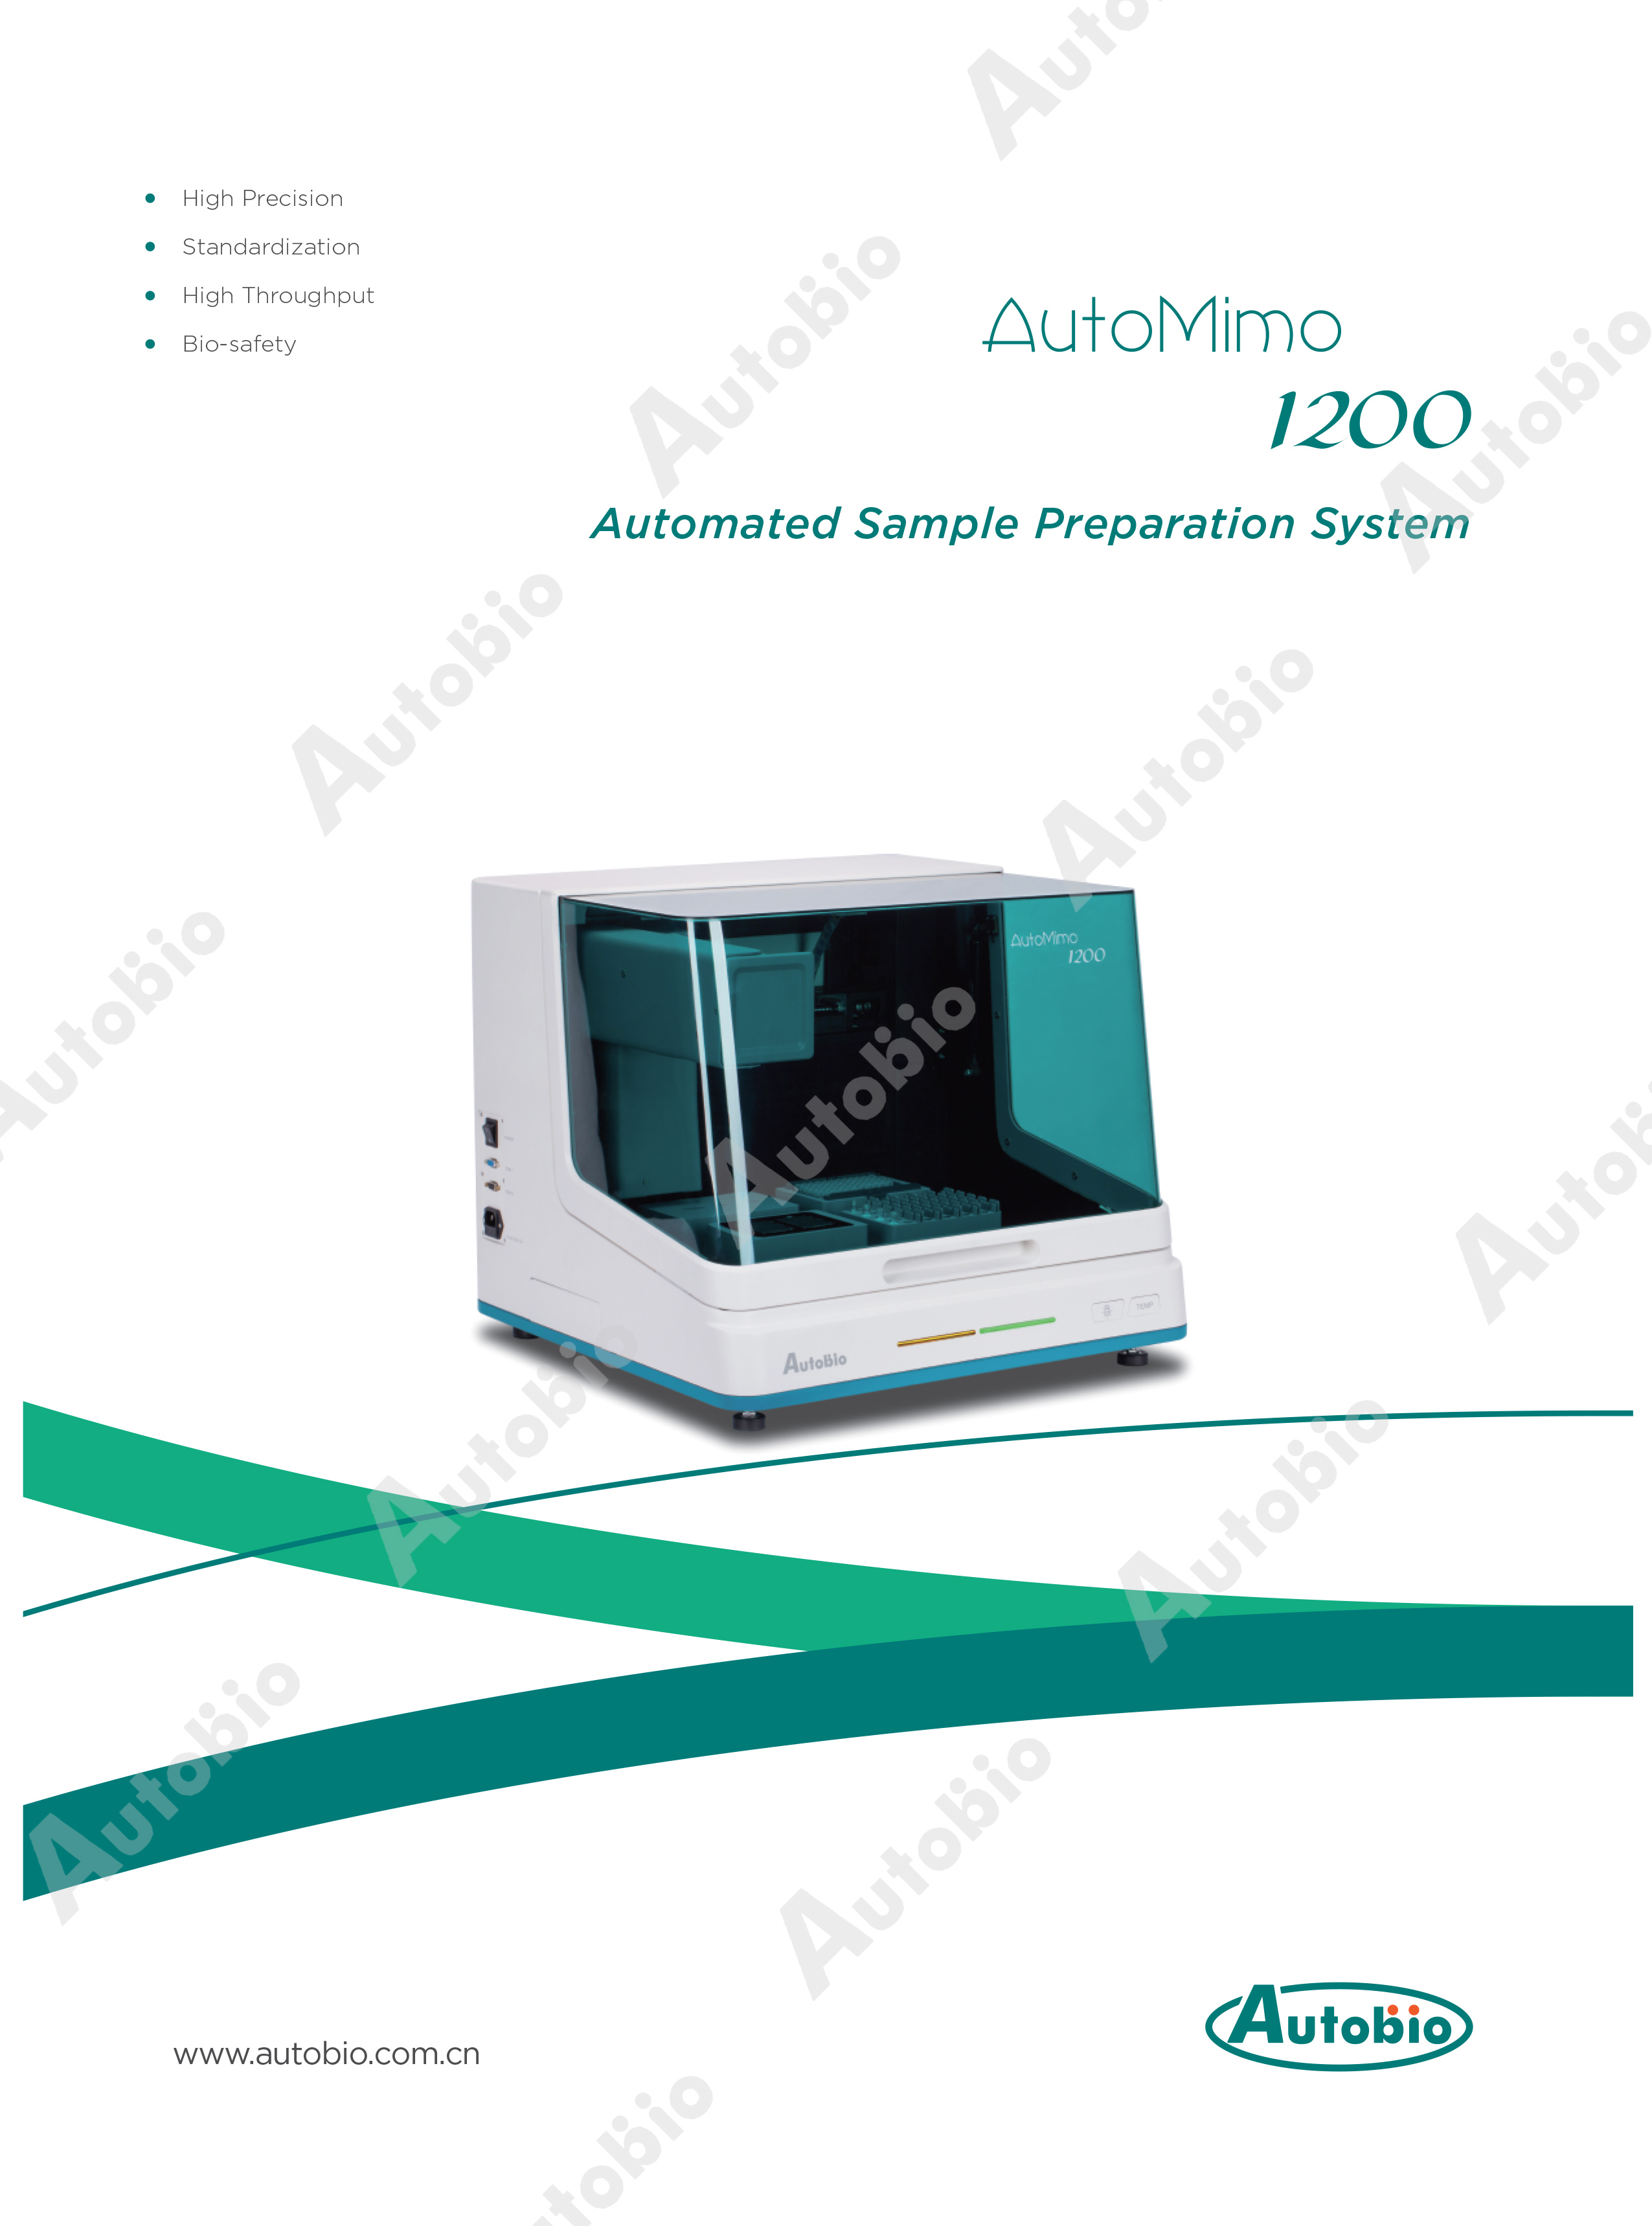 Automimo 1200